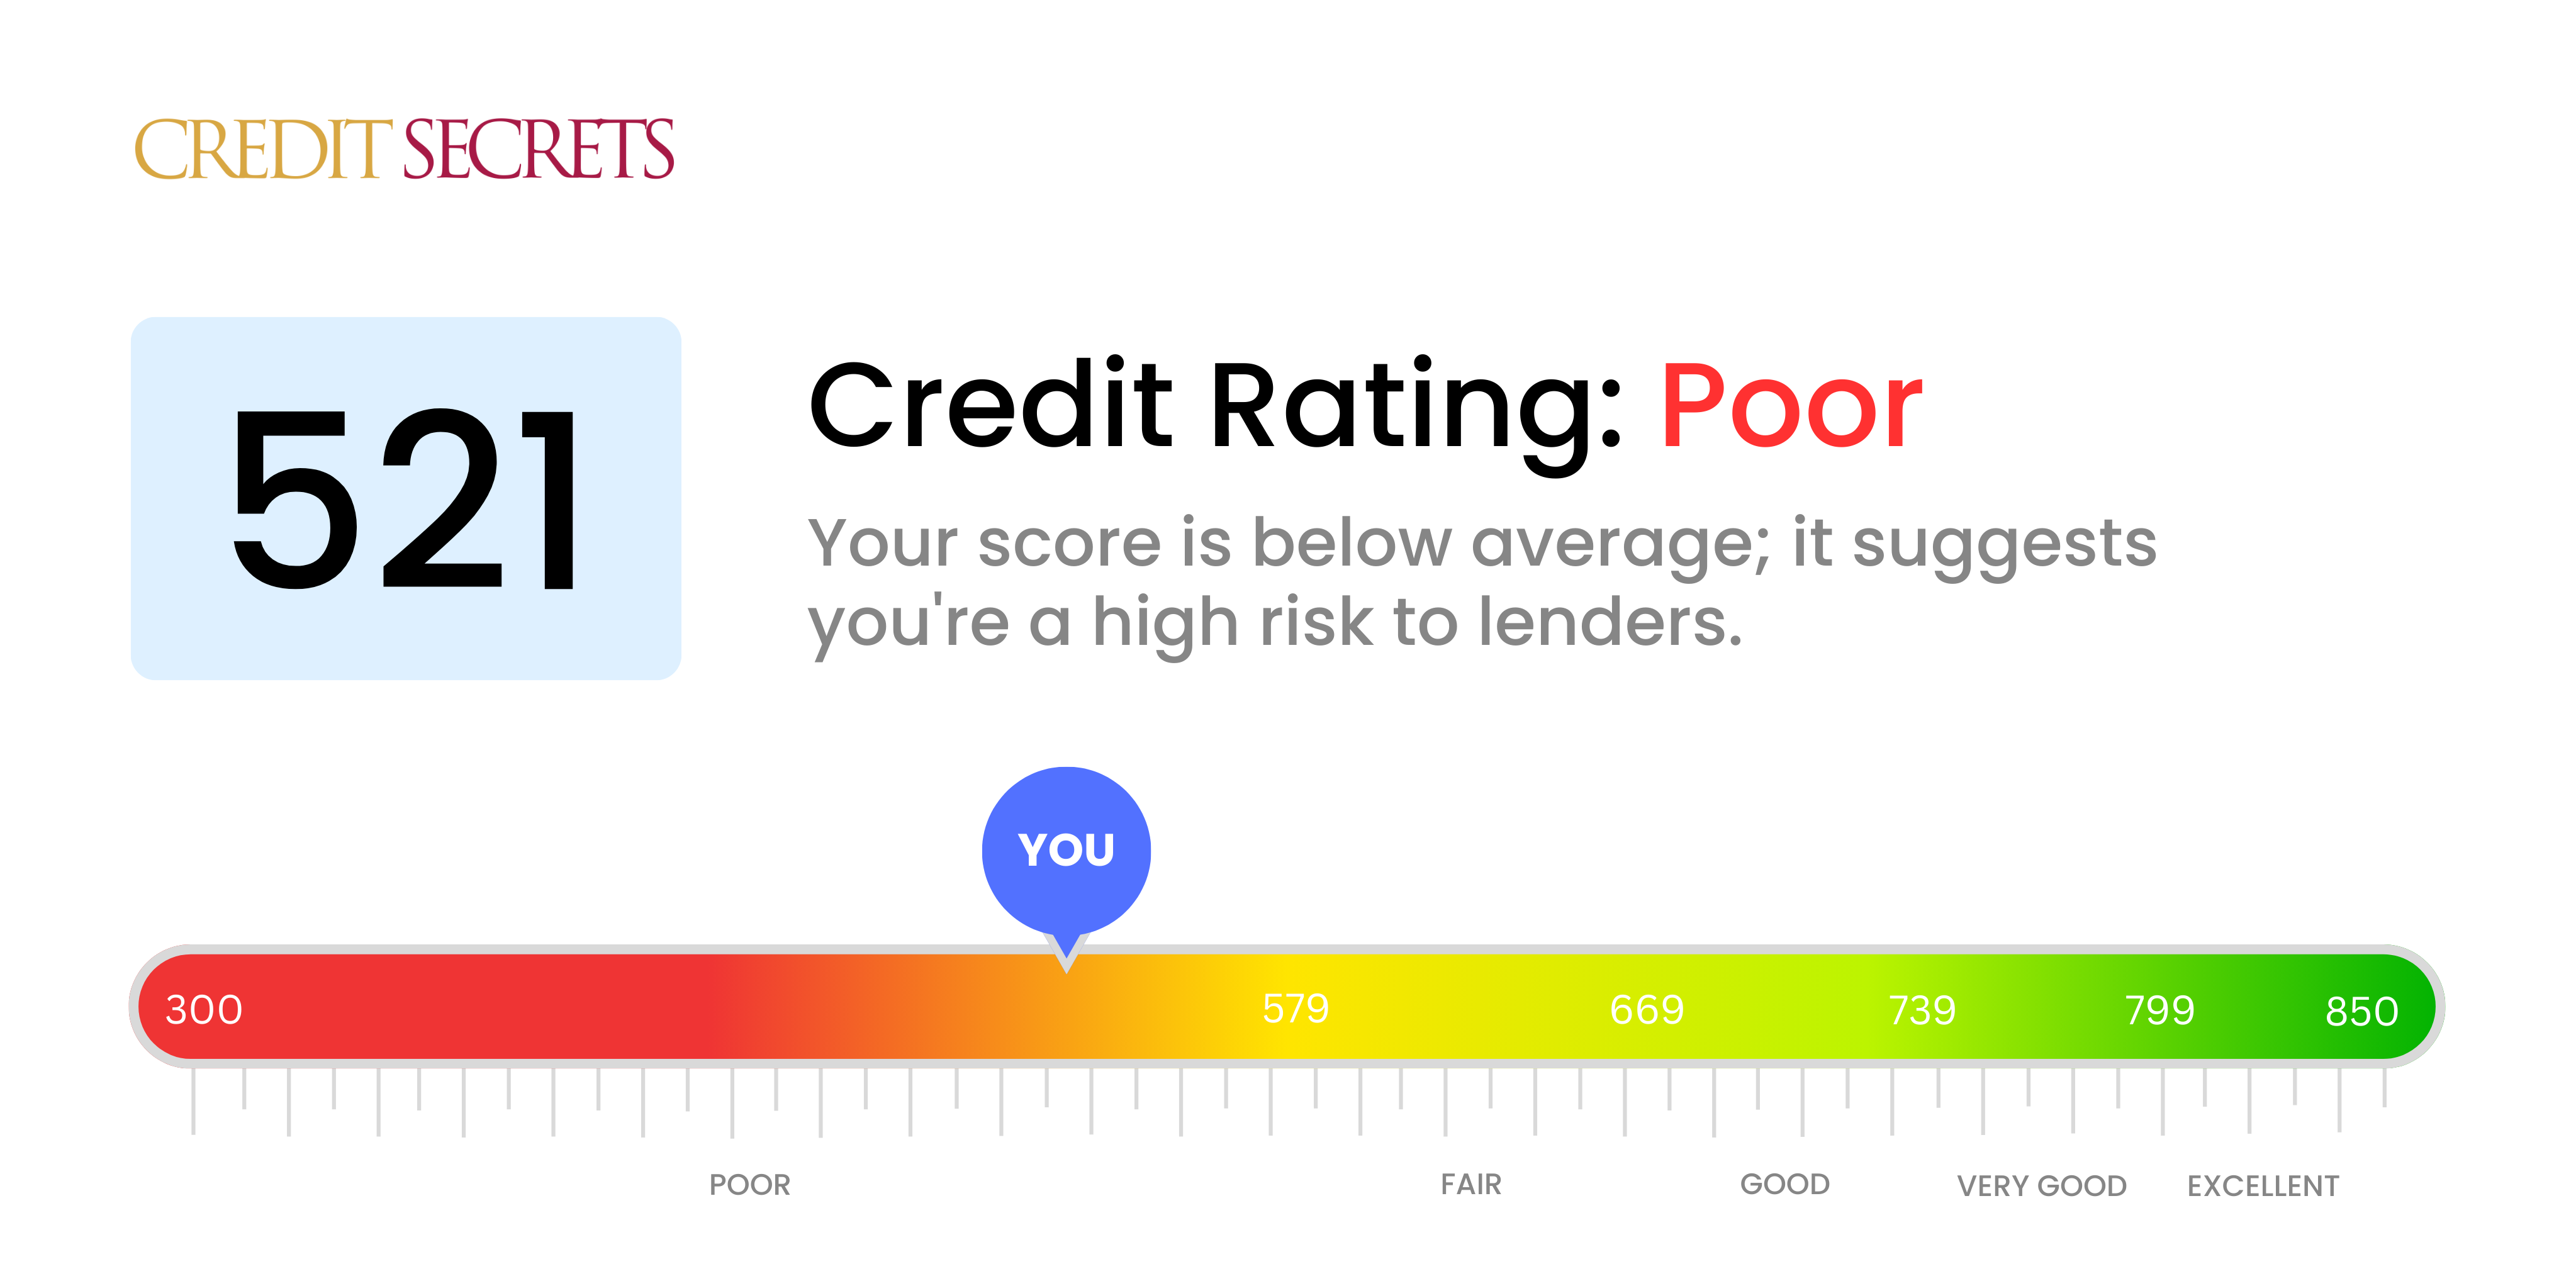 Is 521 a good credit score?